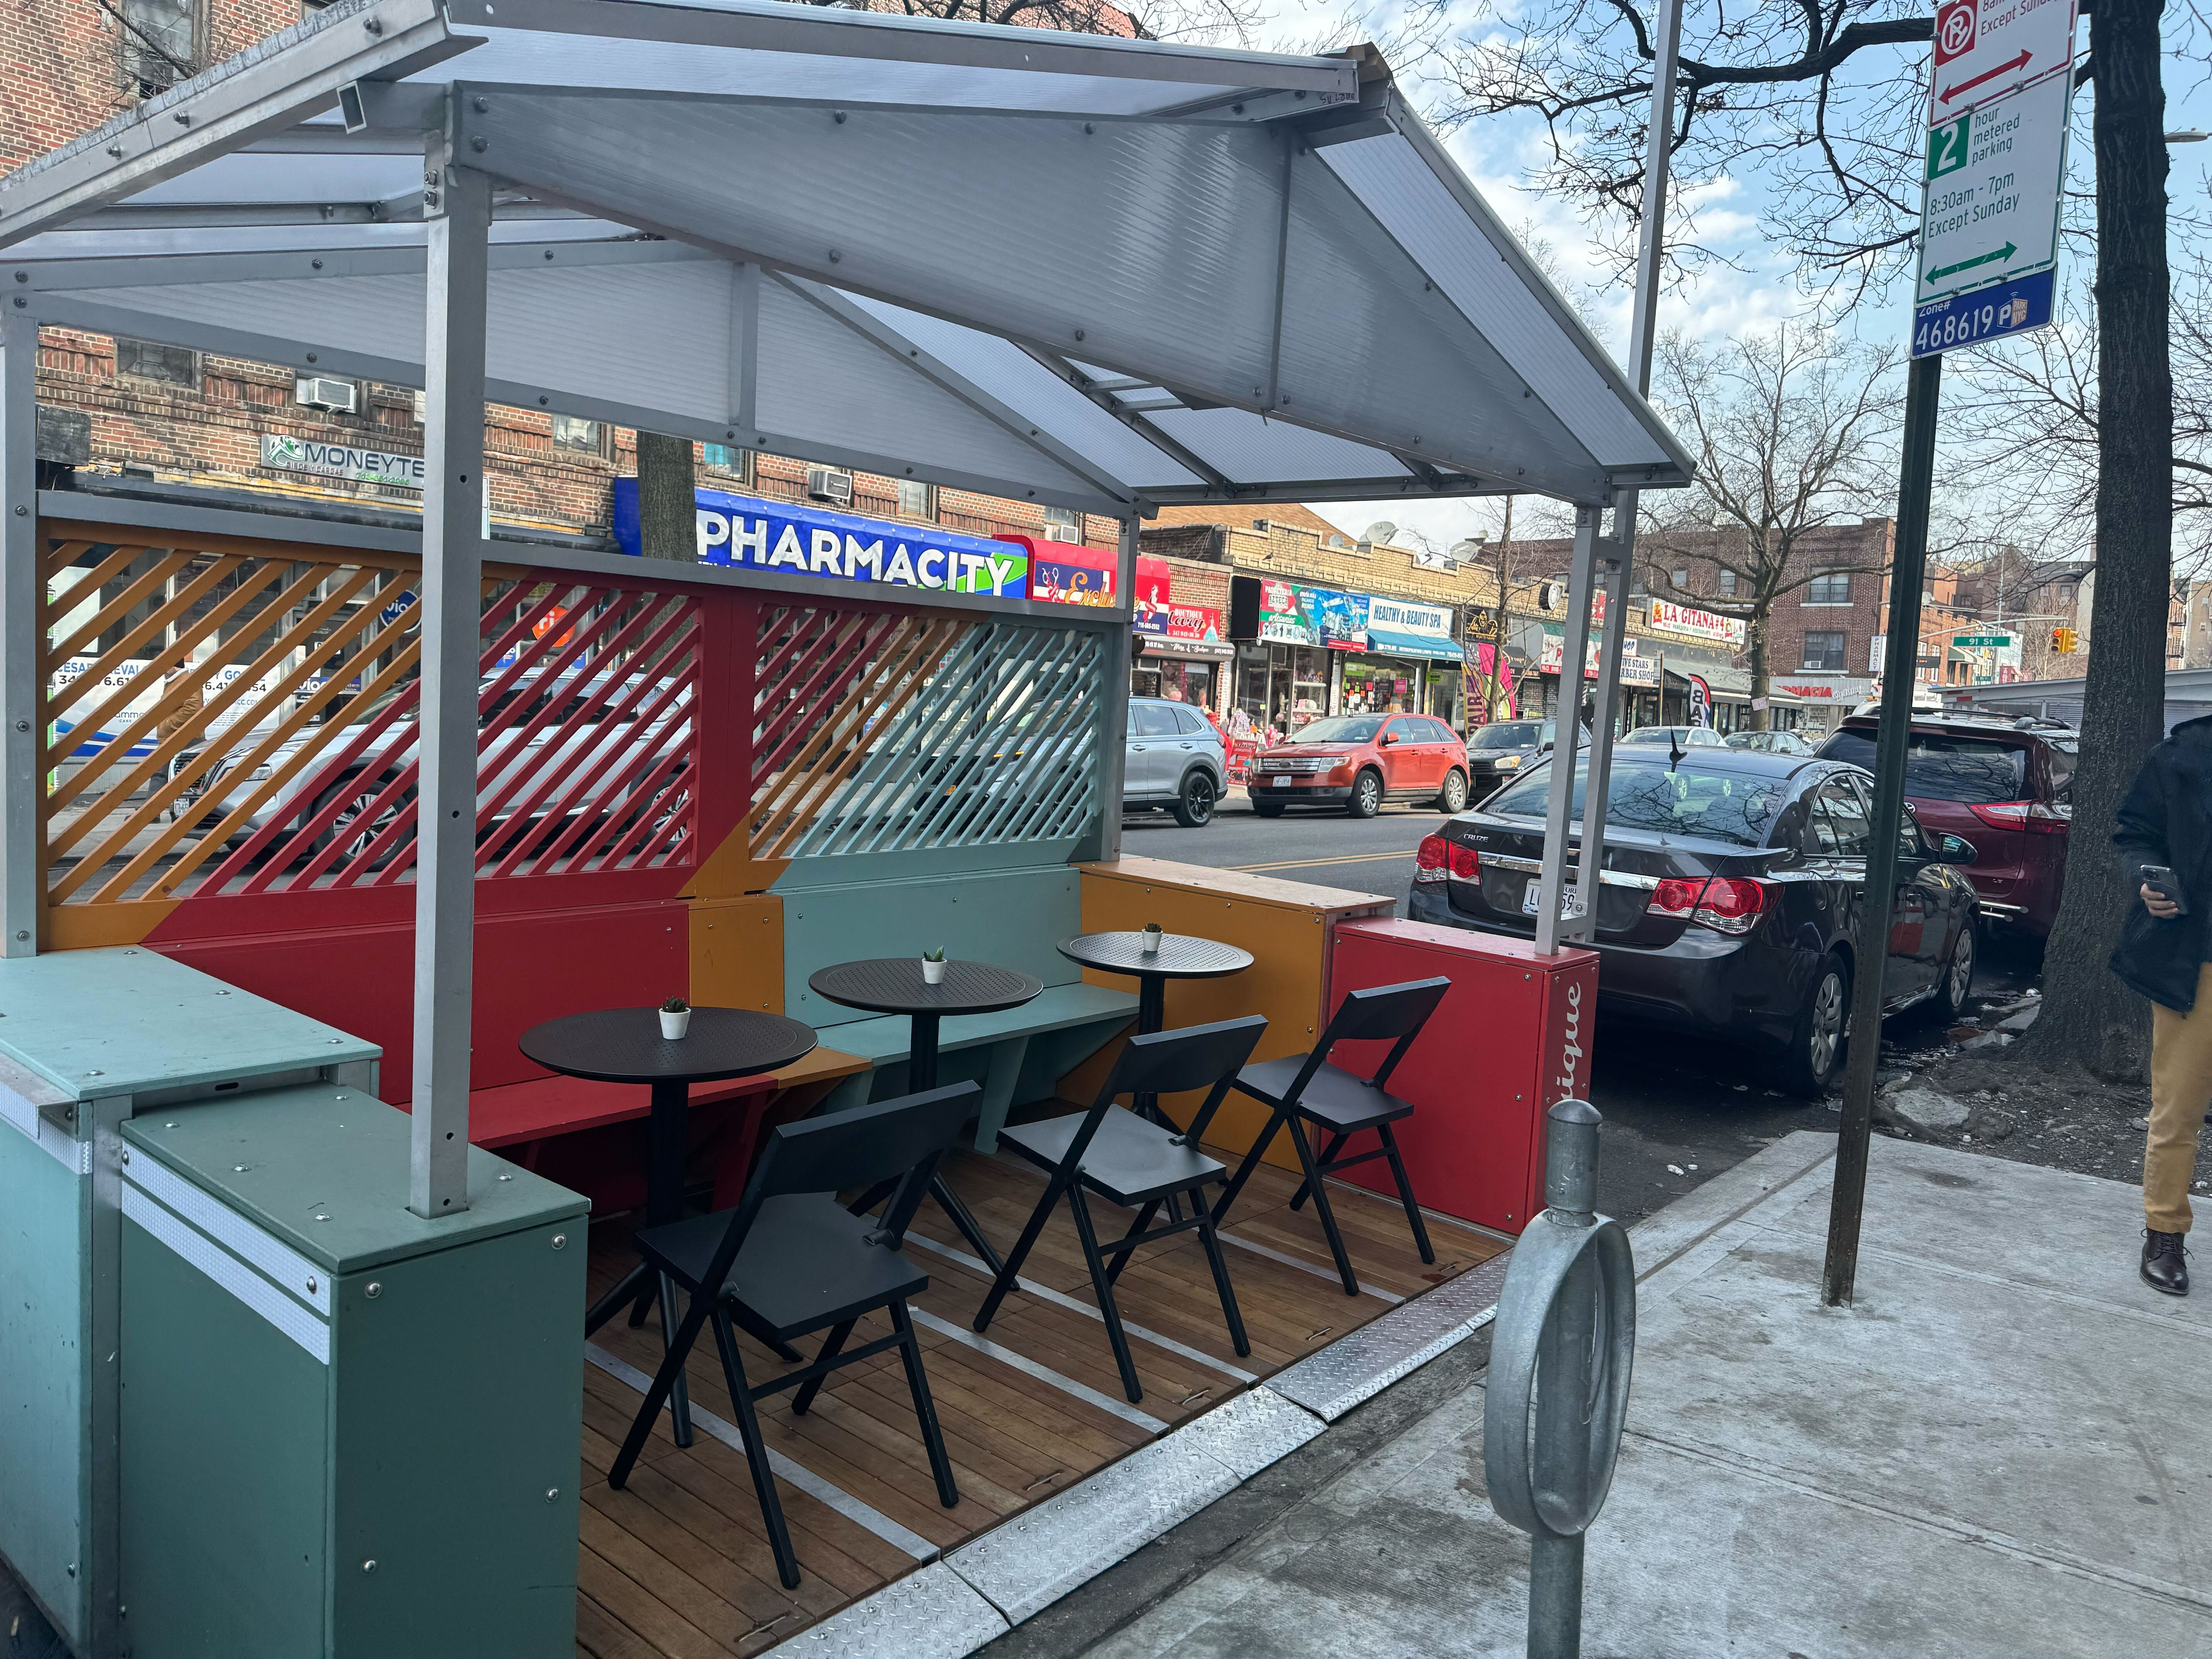 An outdoor dining shed on the street in Queens.